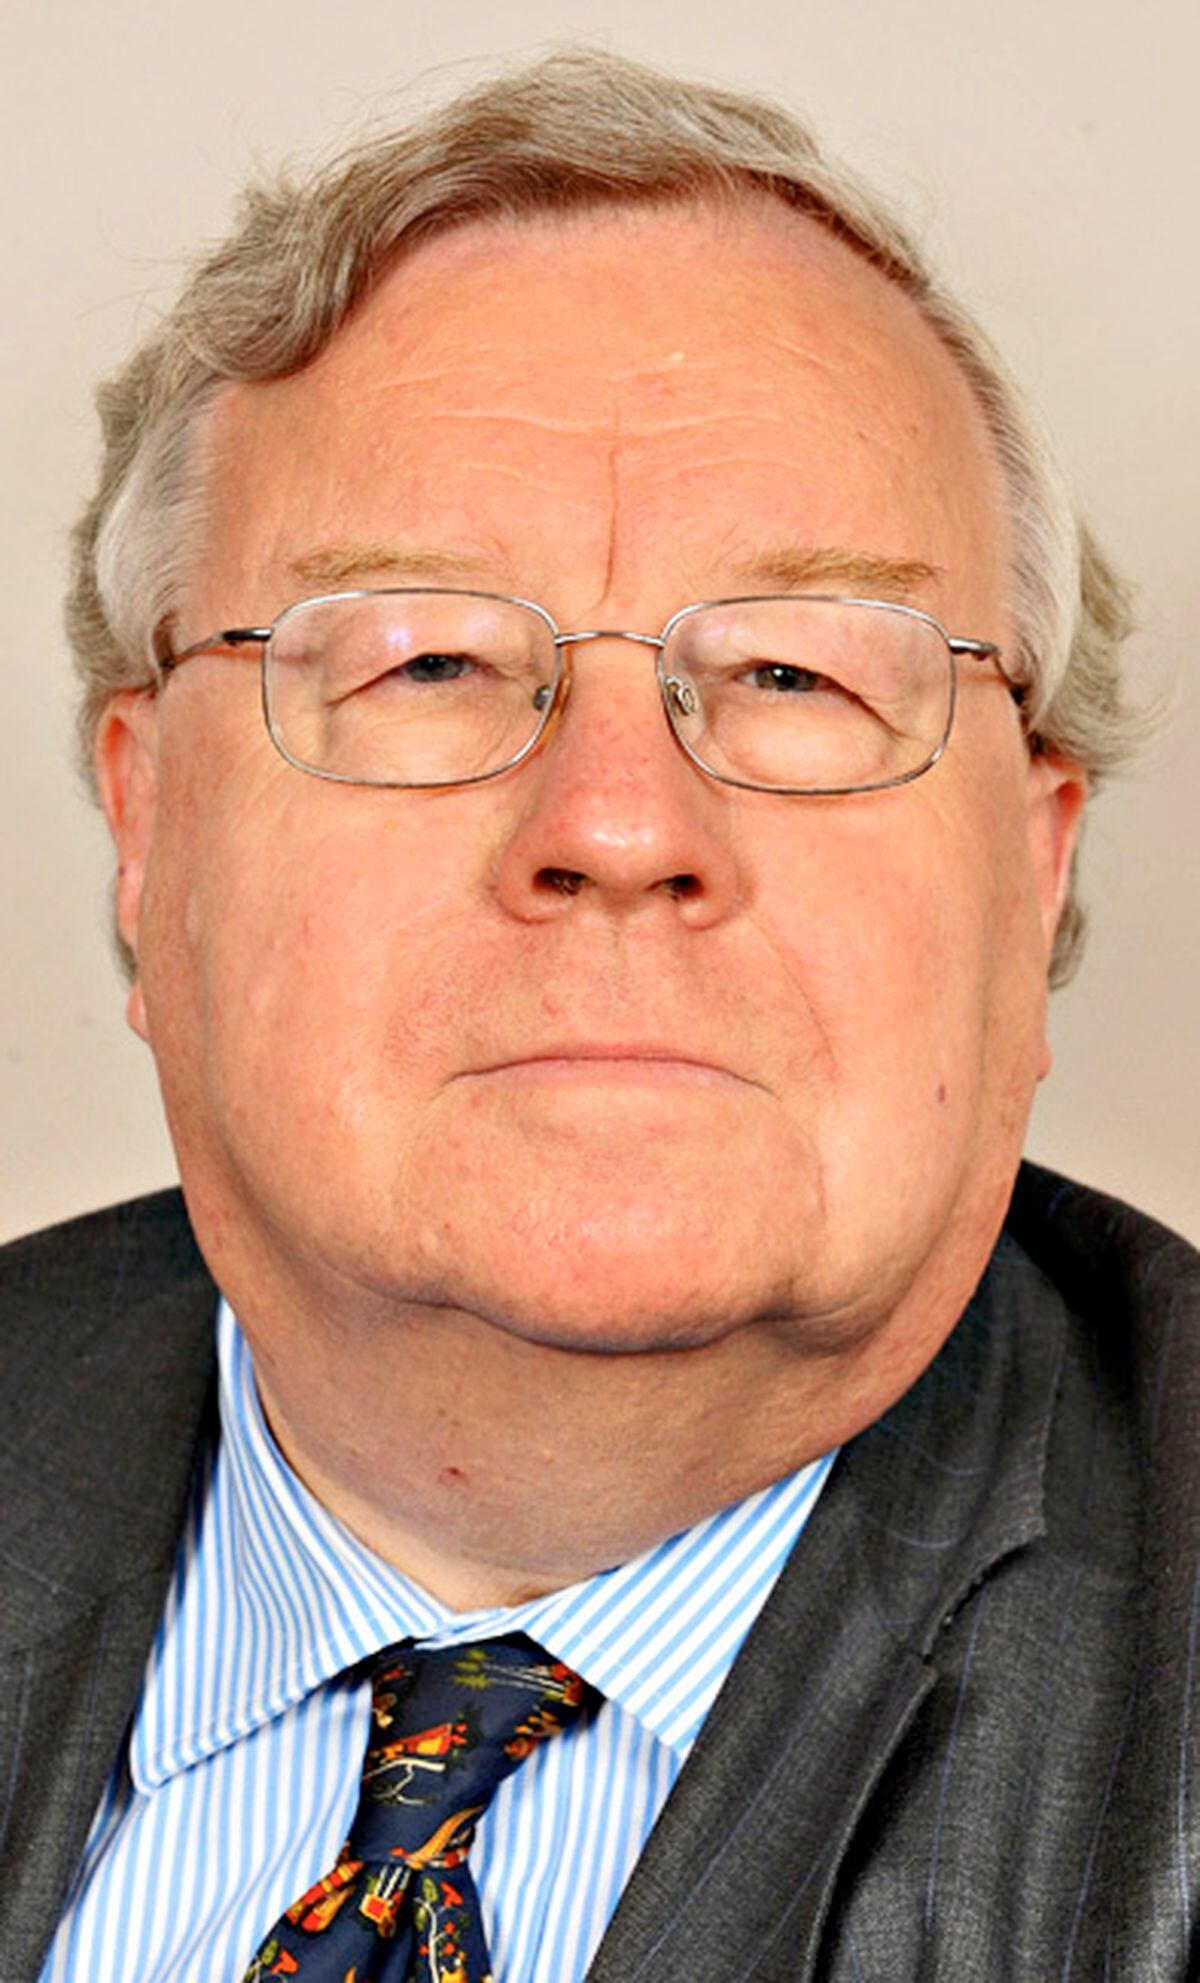 Lord Patrick Cormack, previously Conservative MP for South Staffordshire